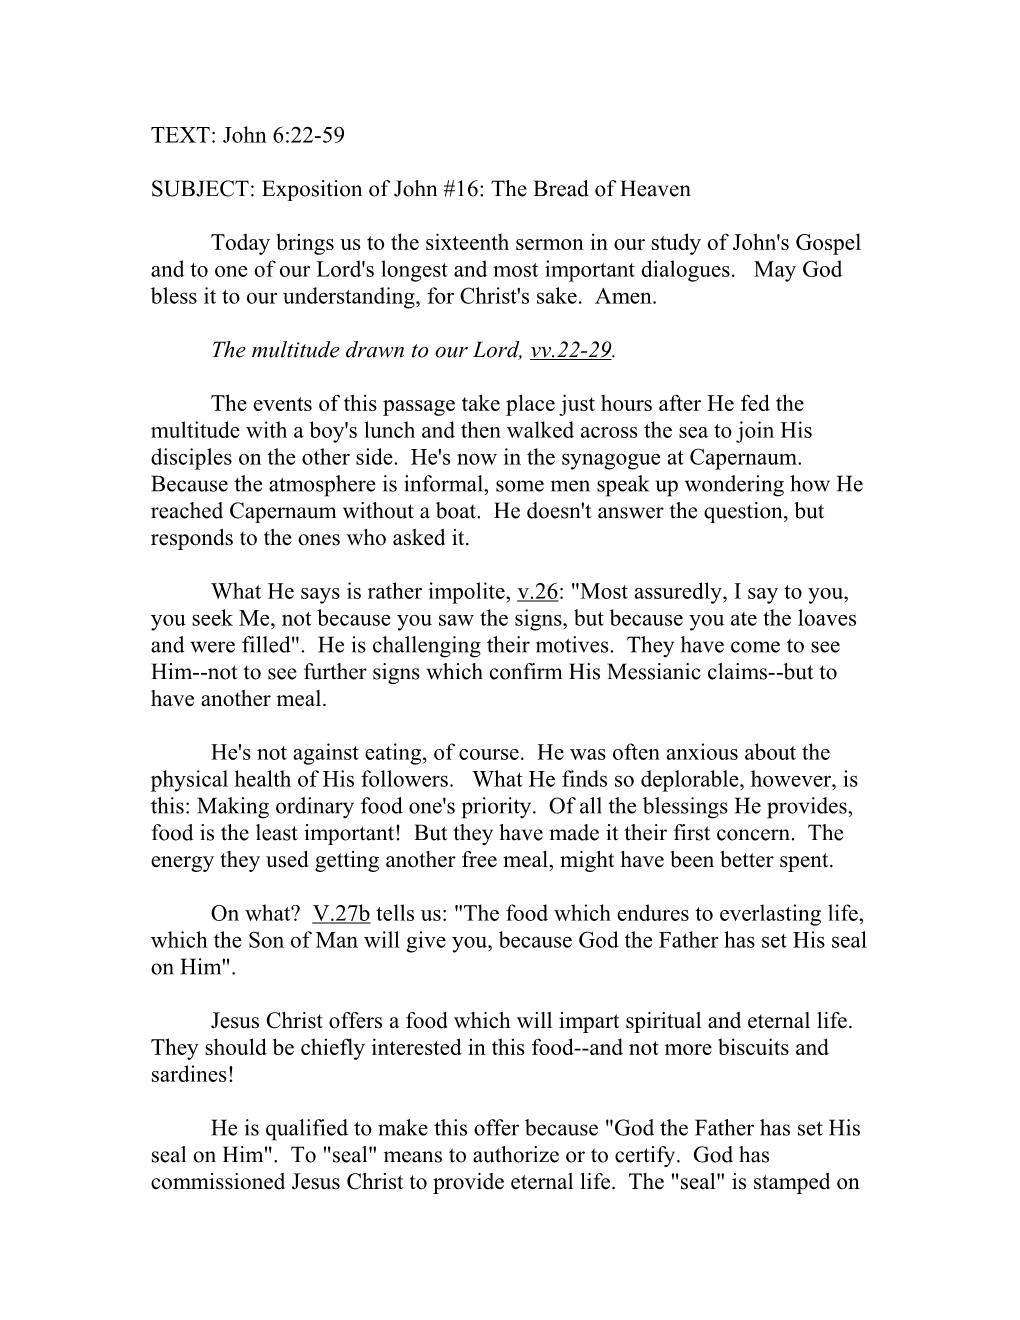 SUBJECT: Exposition of John #16: the Bread of Heaven